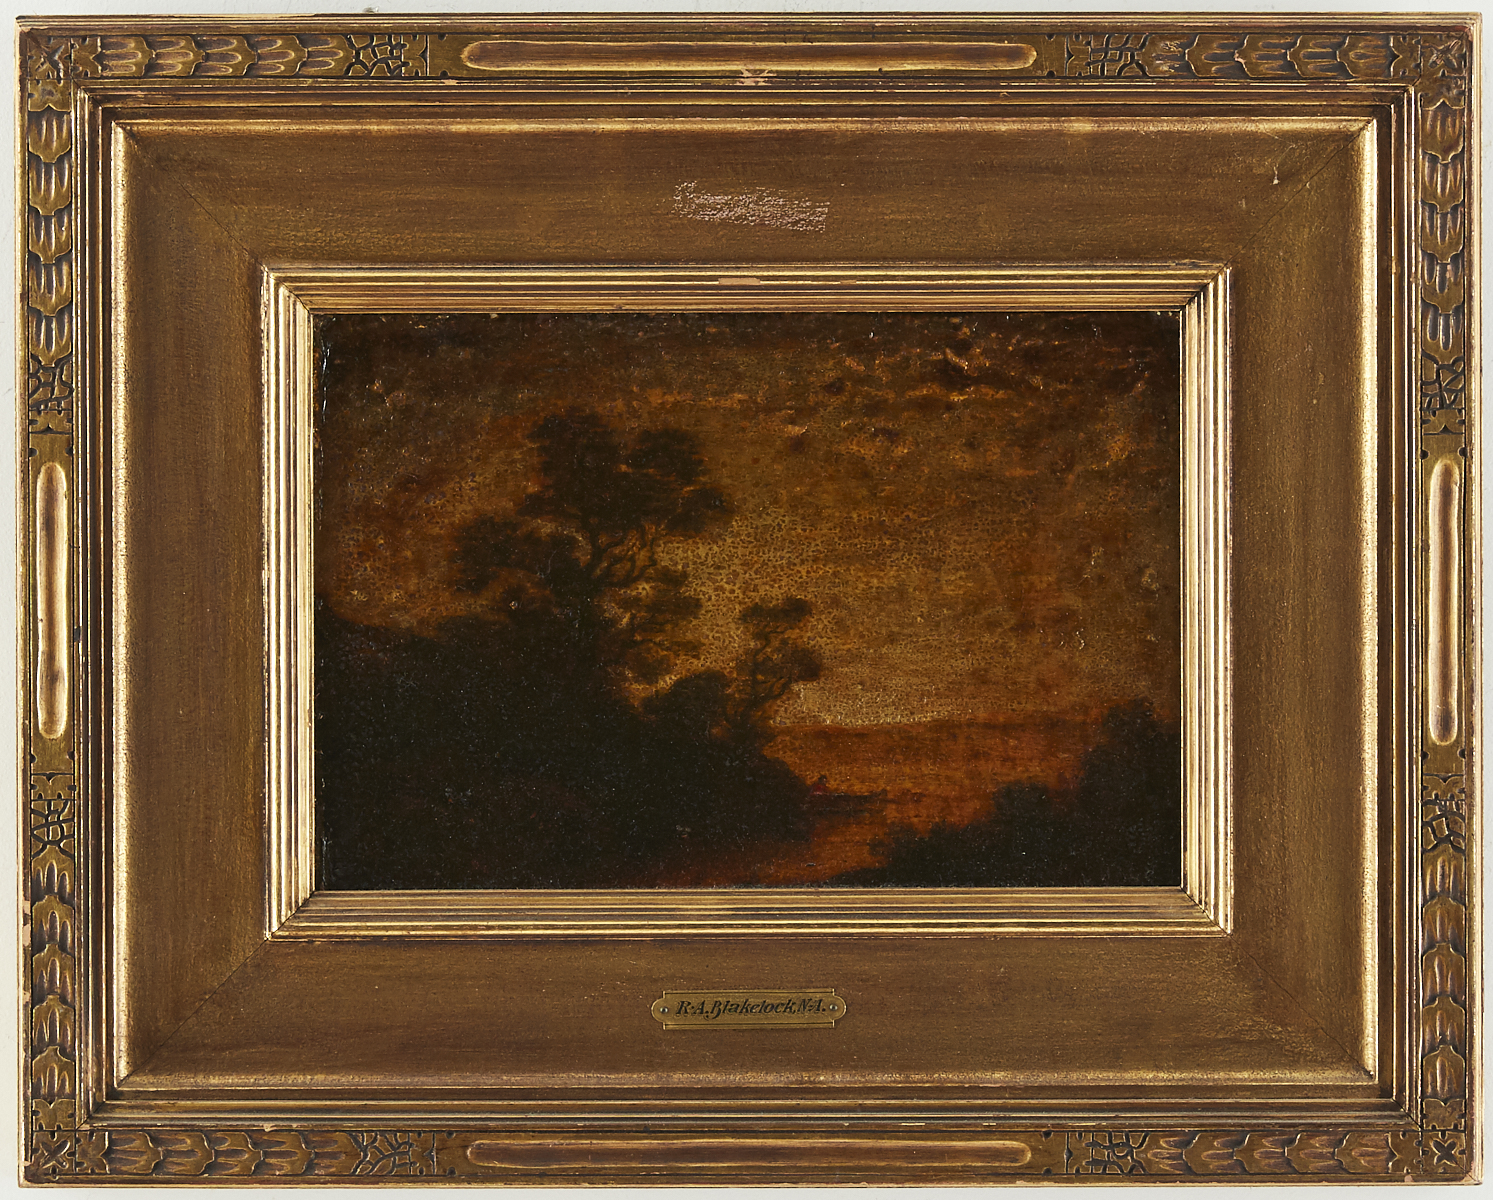 Attributed to Ralph Blakelock Twilight Landscape Oil on Board - Image 2 of 3